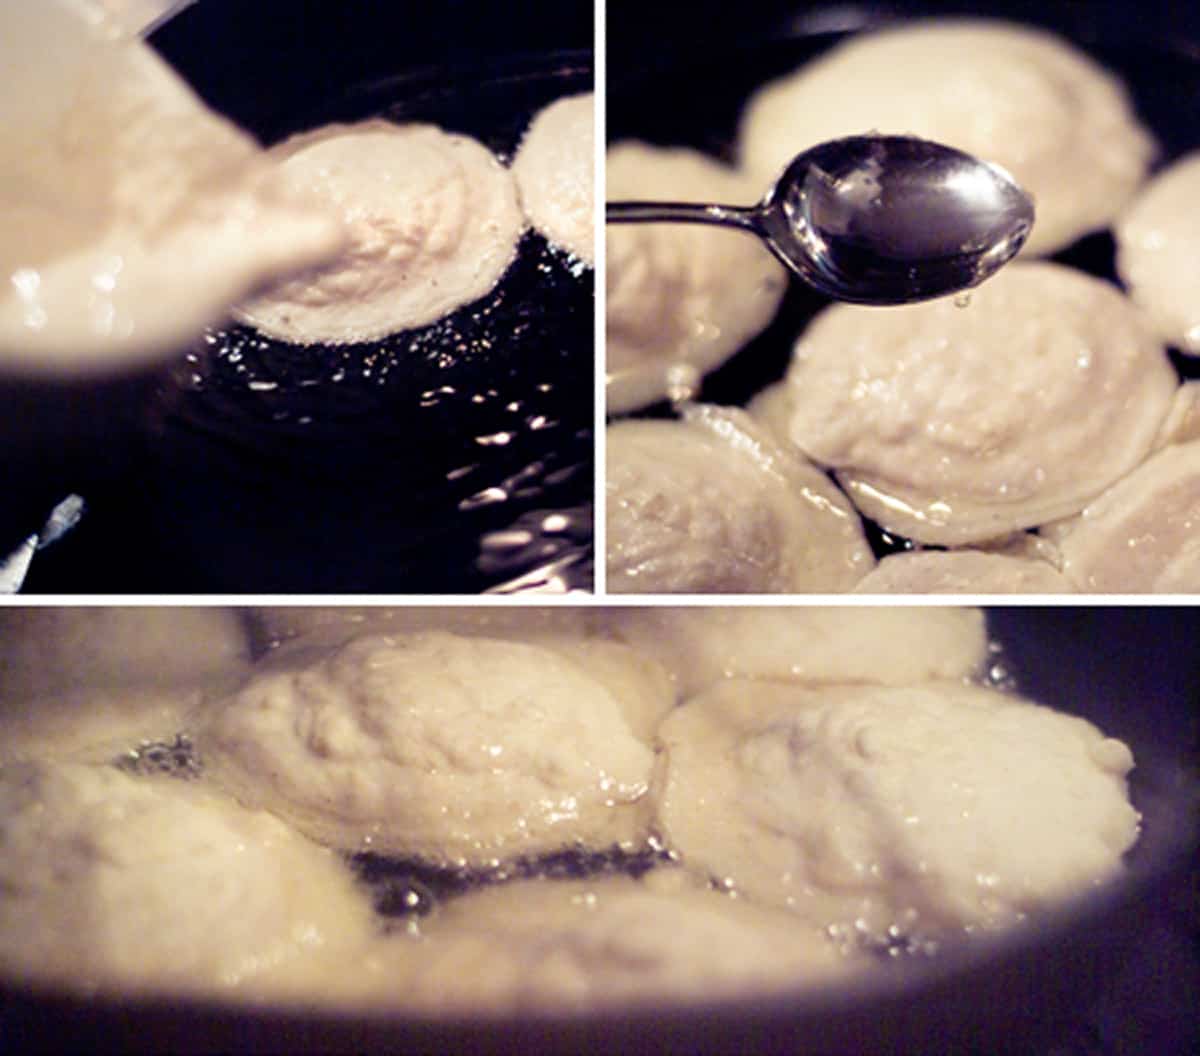 Photo collage showing the pouring and forming of corn pones in an iron skillet.